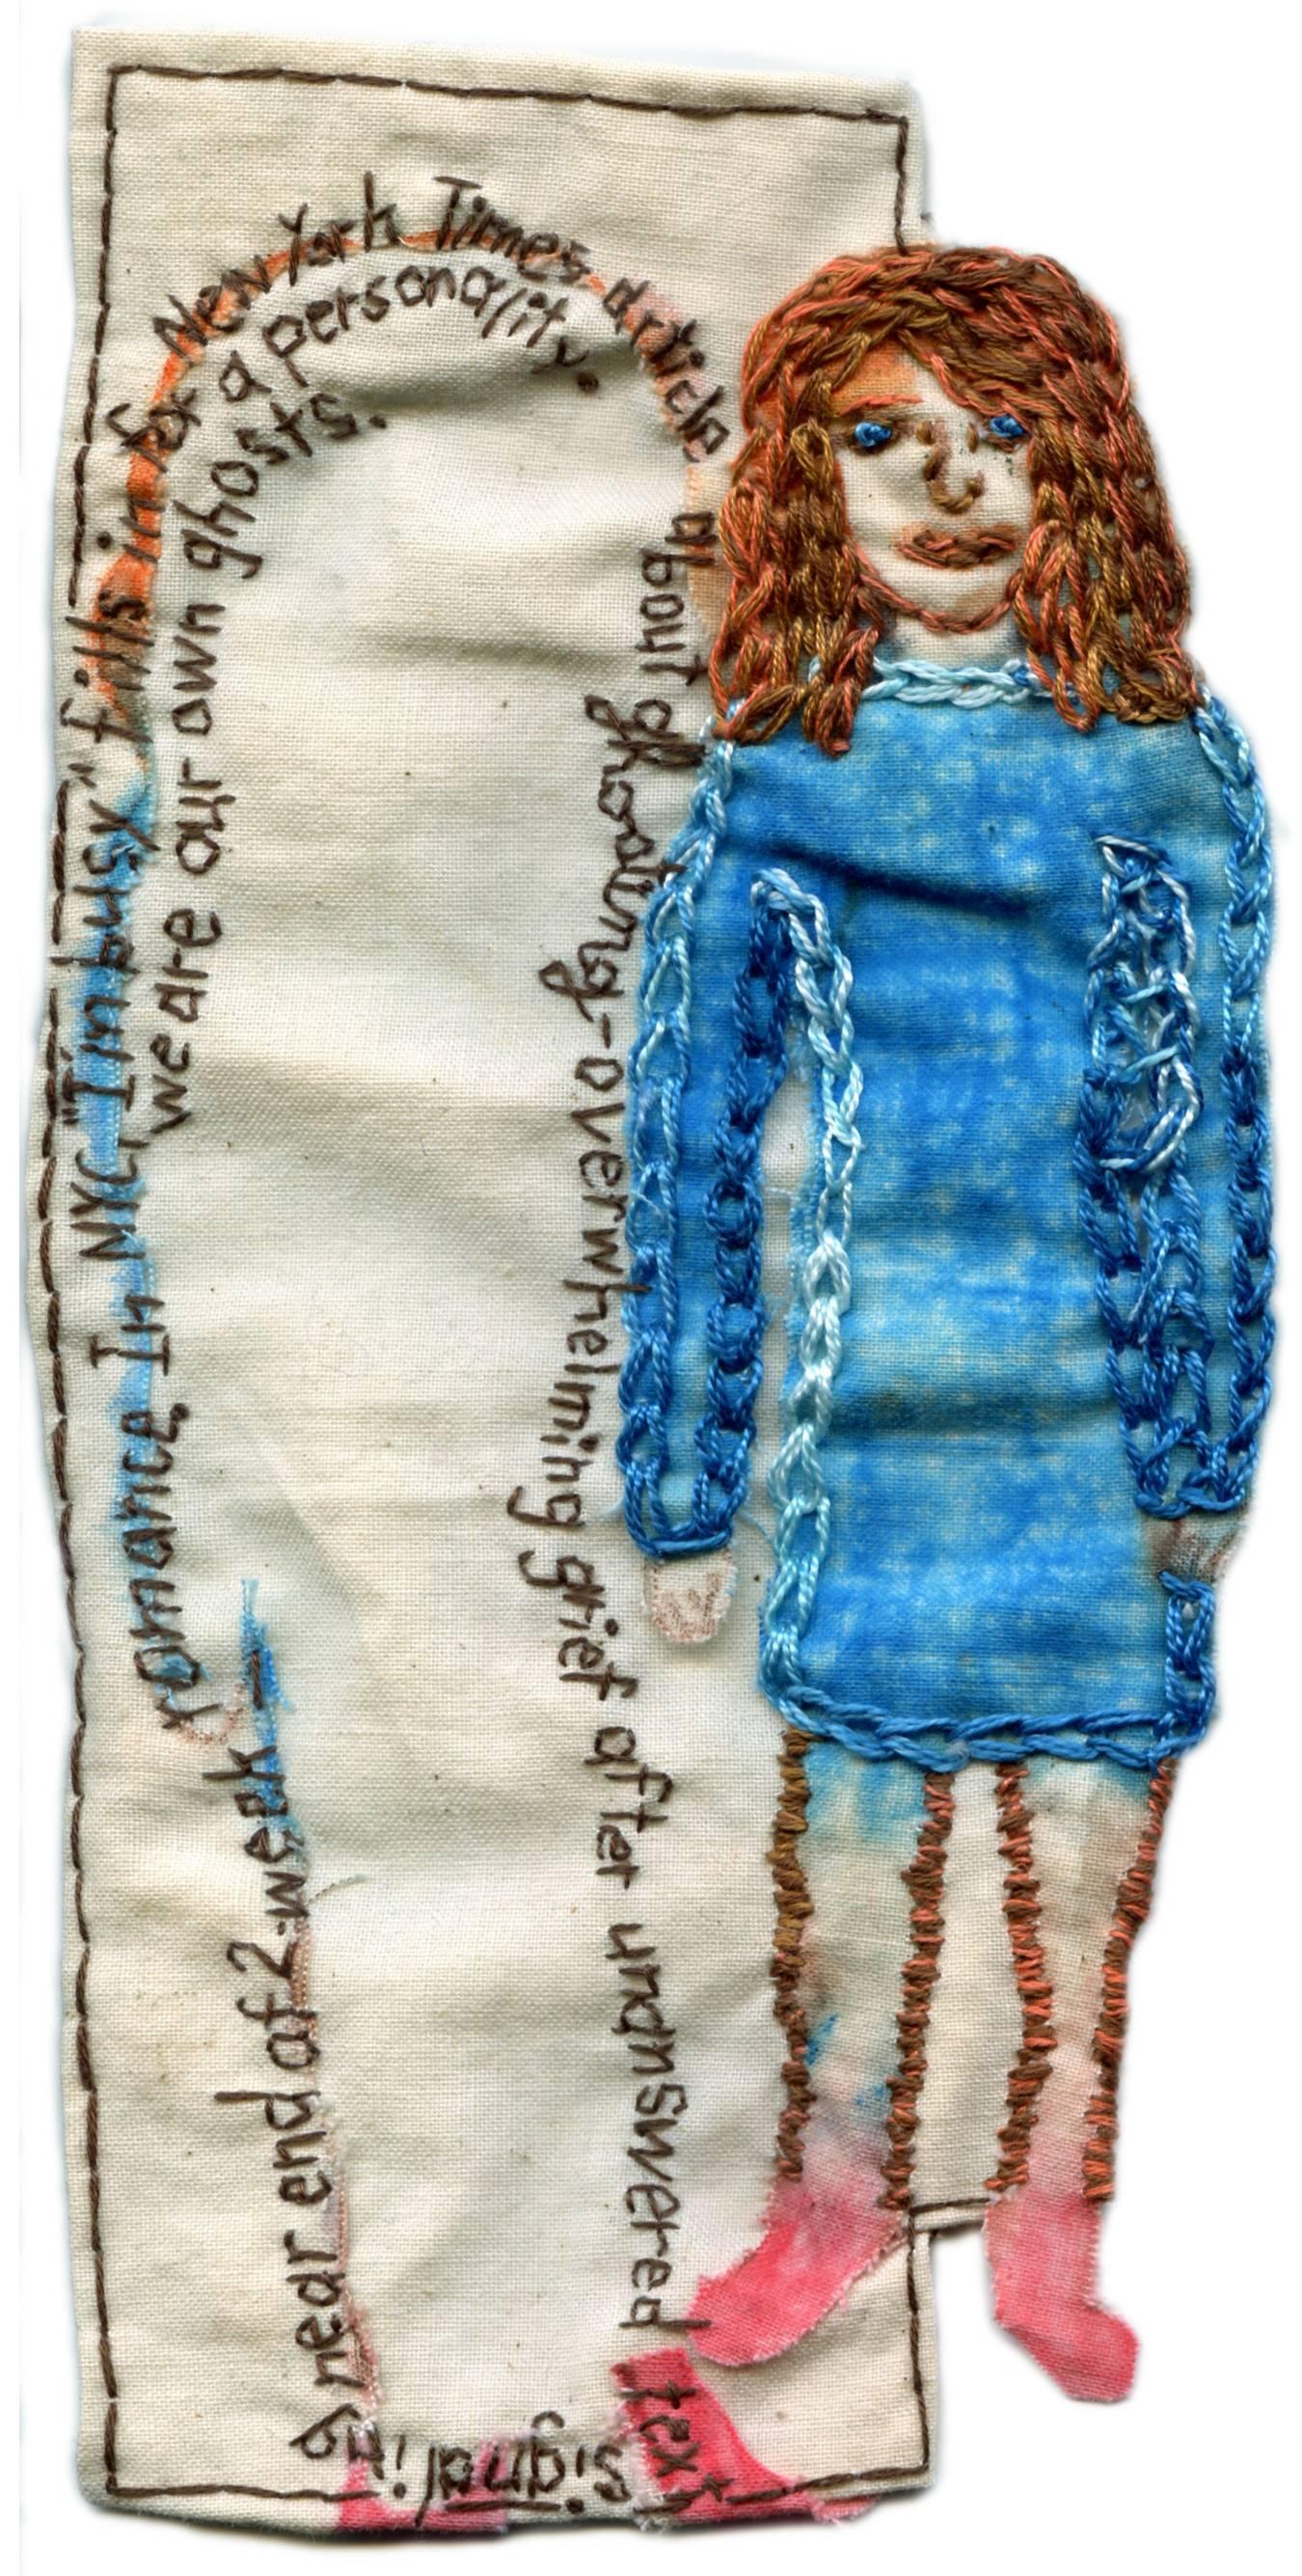 Ghosting in NYC- narrative representational embroidered fabric - Mixed Media Art by Iviva Olenick